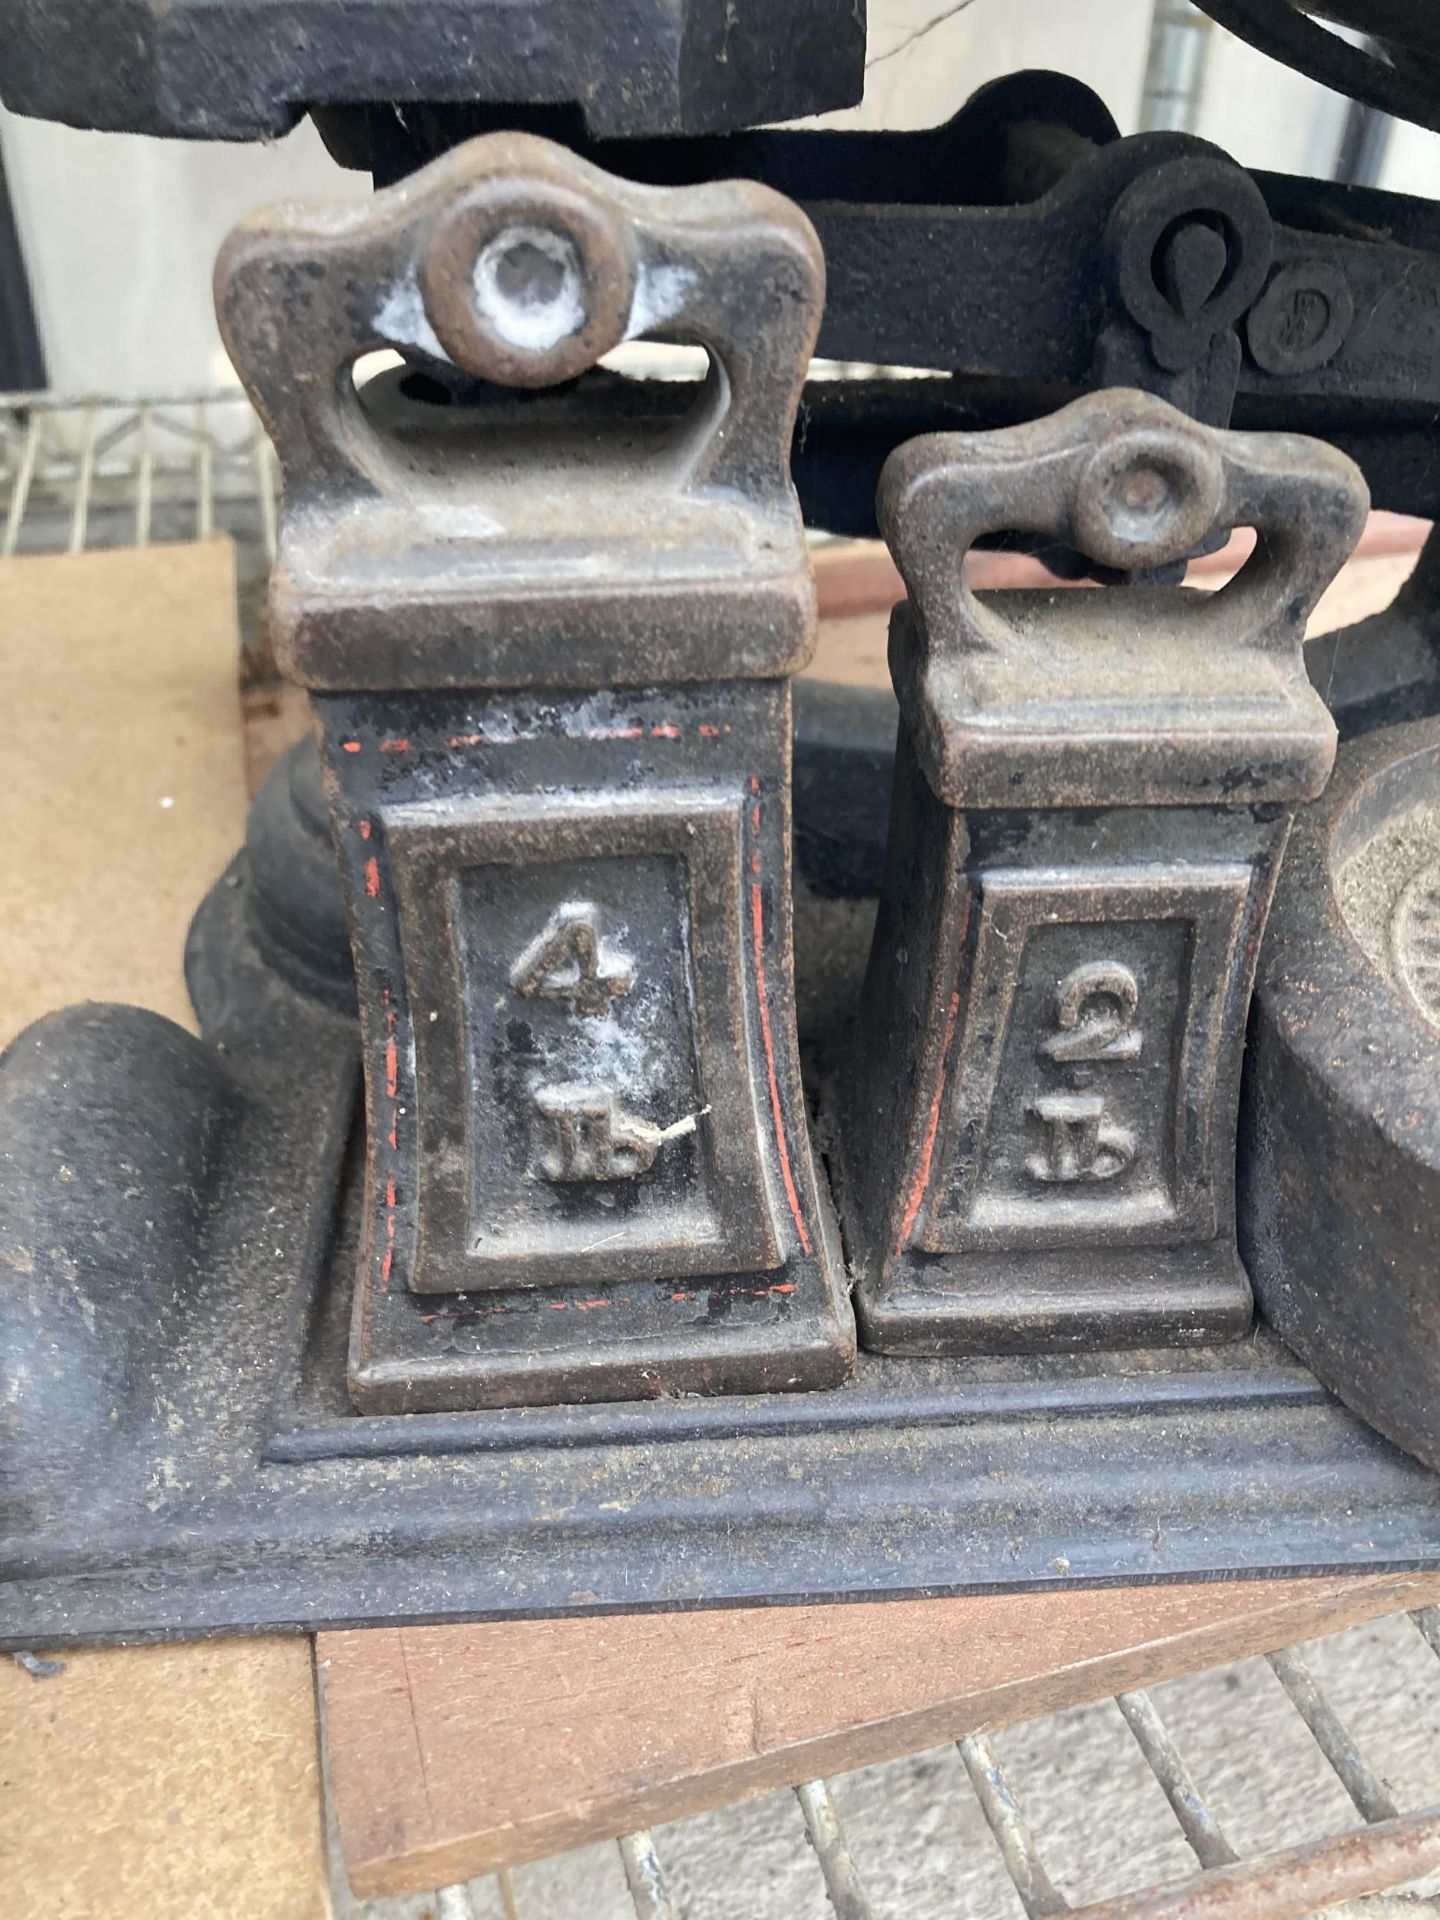 A PAIR OF VINTAGE BALANCE SCALES WITH AN ASSORTMENT OF WEIGHTS - Image 2 of 5